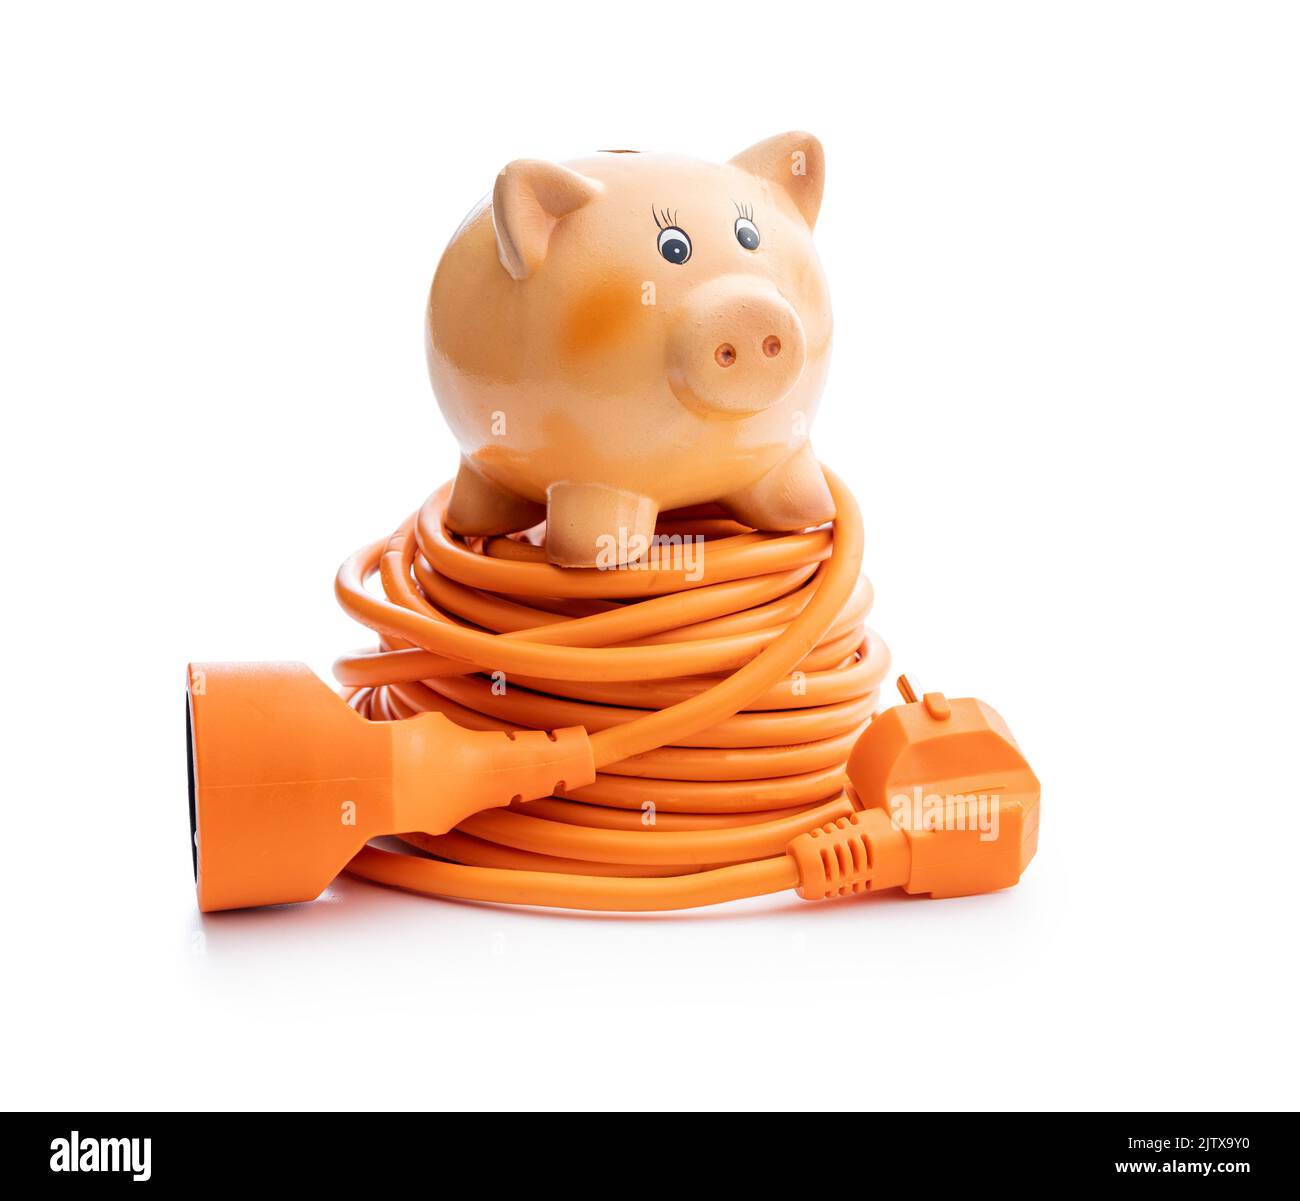 Orange extension power cord and piggy bank isolated on the white background. Stock Photo